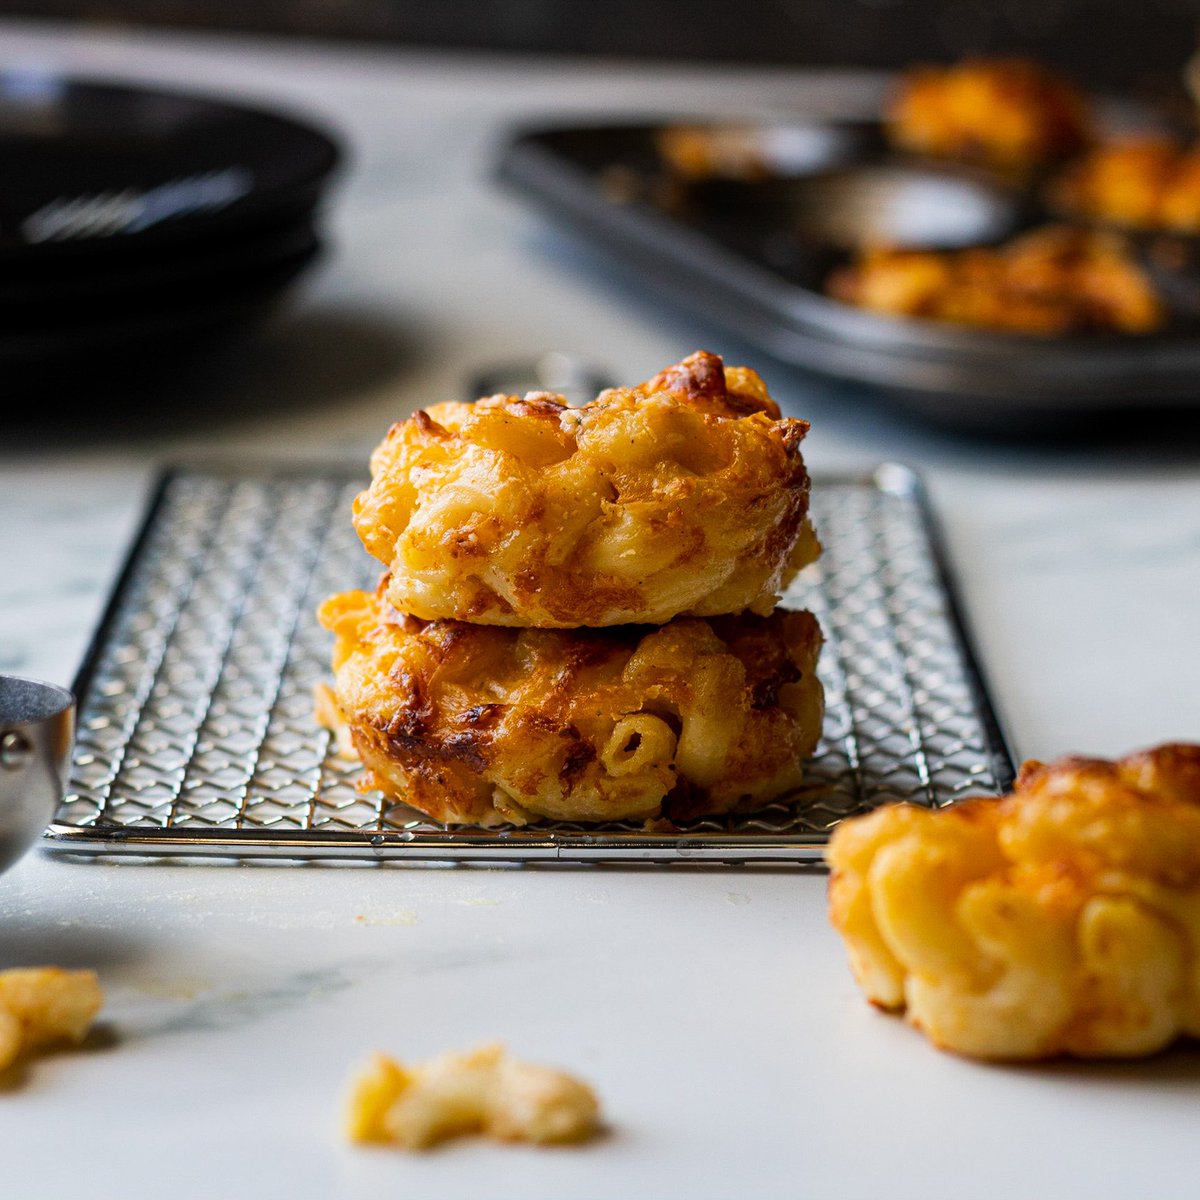 Mac and cheese bites are not only delicious but incredibly fun to capture on camera. Who else loves this snack as much as I do?

#foodphotography #foodphotgrapher #ugc #ugccreator #ugccommunity #ugcphotos